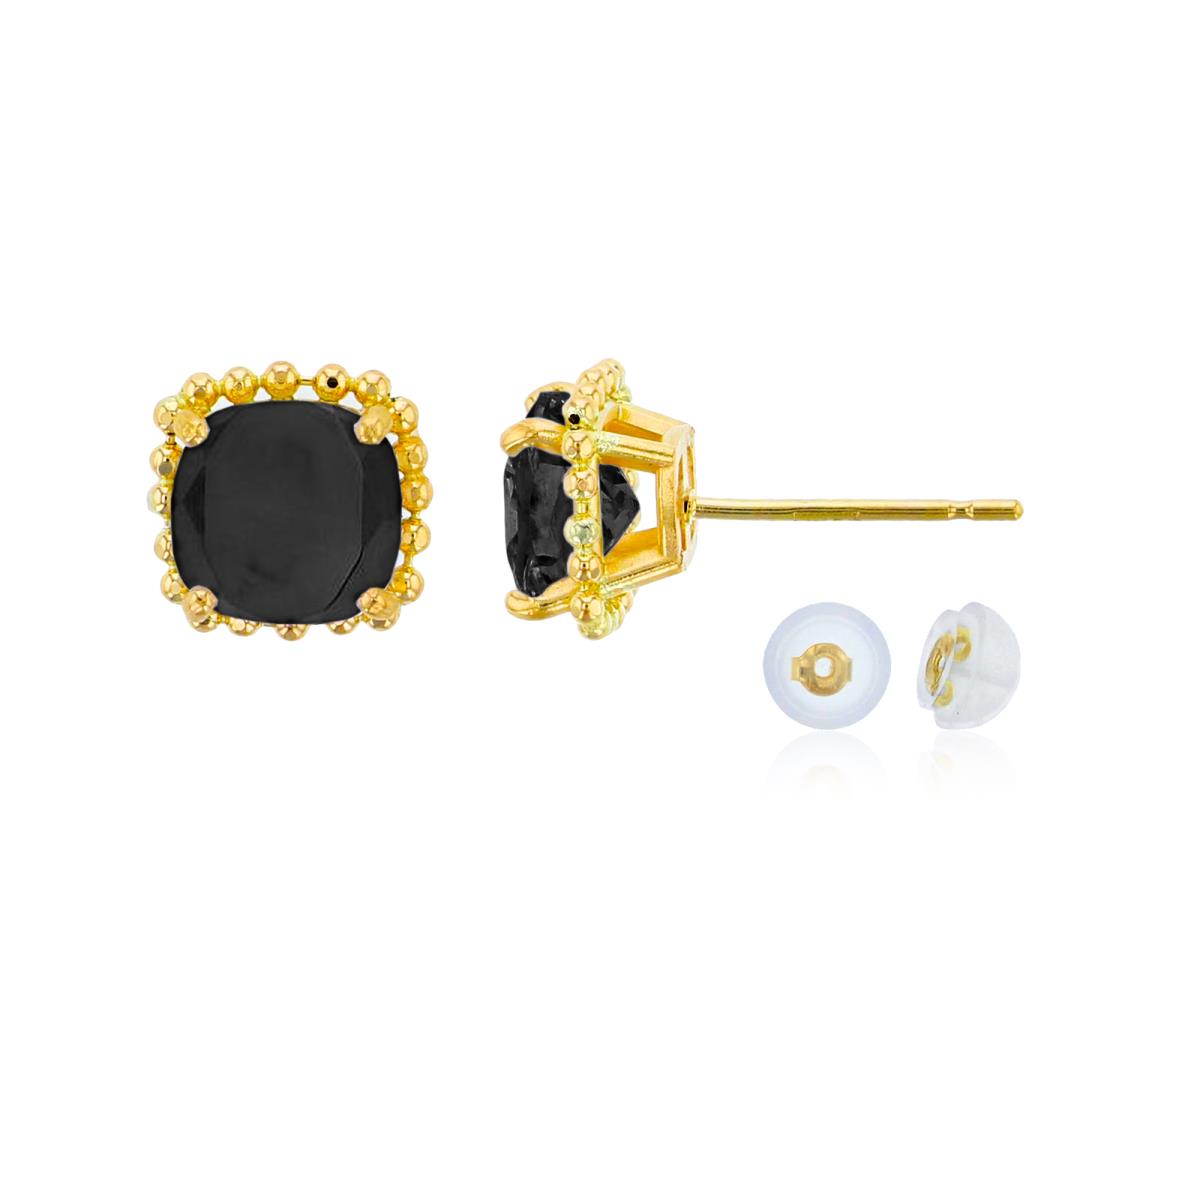 14K Yellow Gold 6x6mm Cushion Cut Onyx Bead Frame Stud Earring with Silicone Back